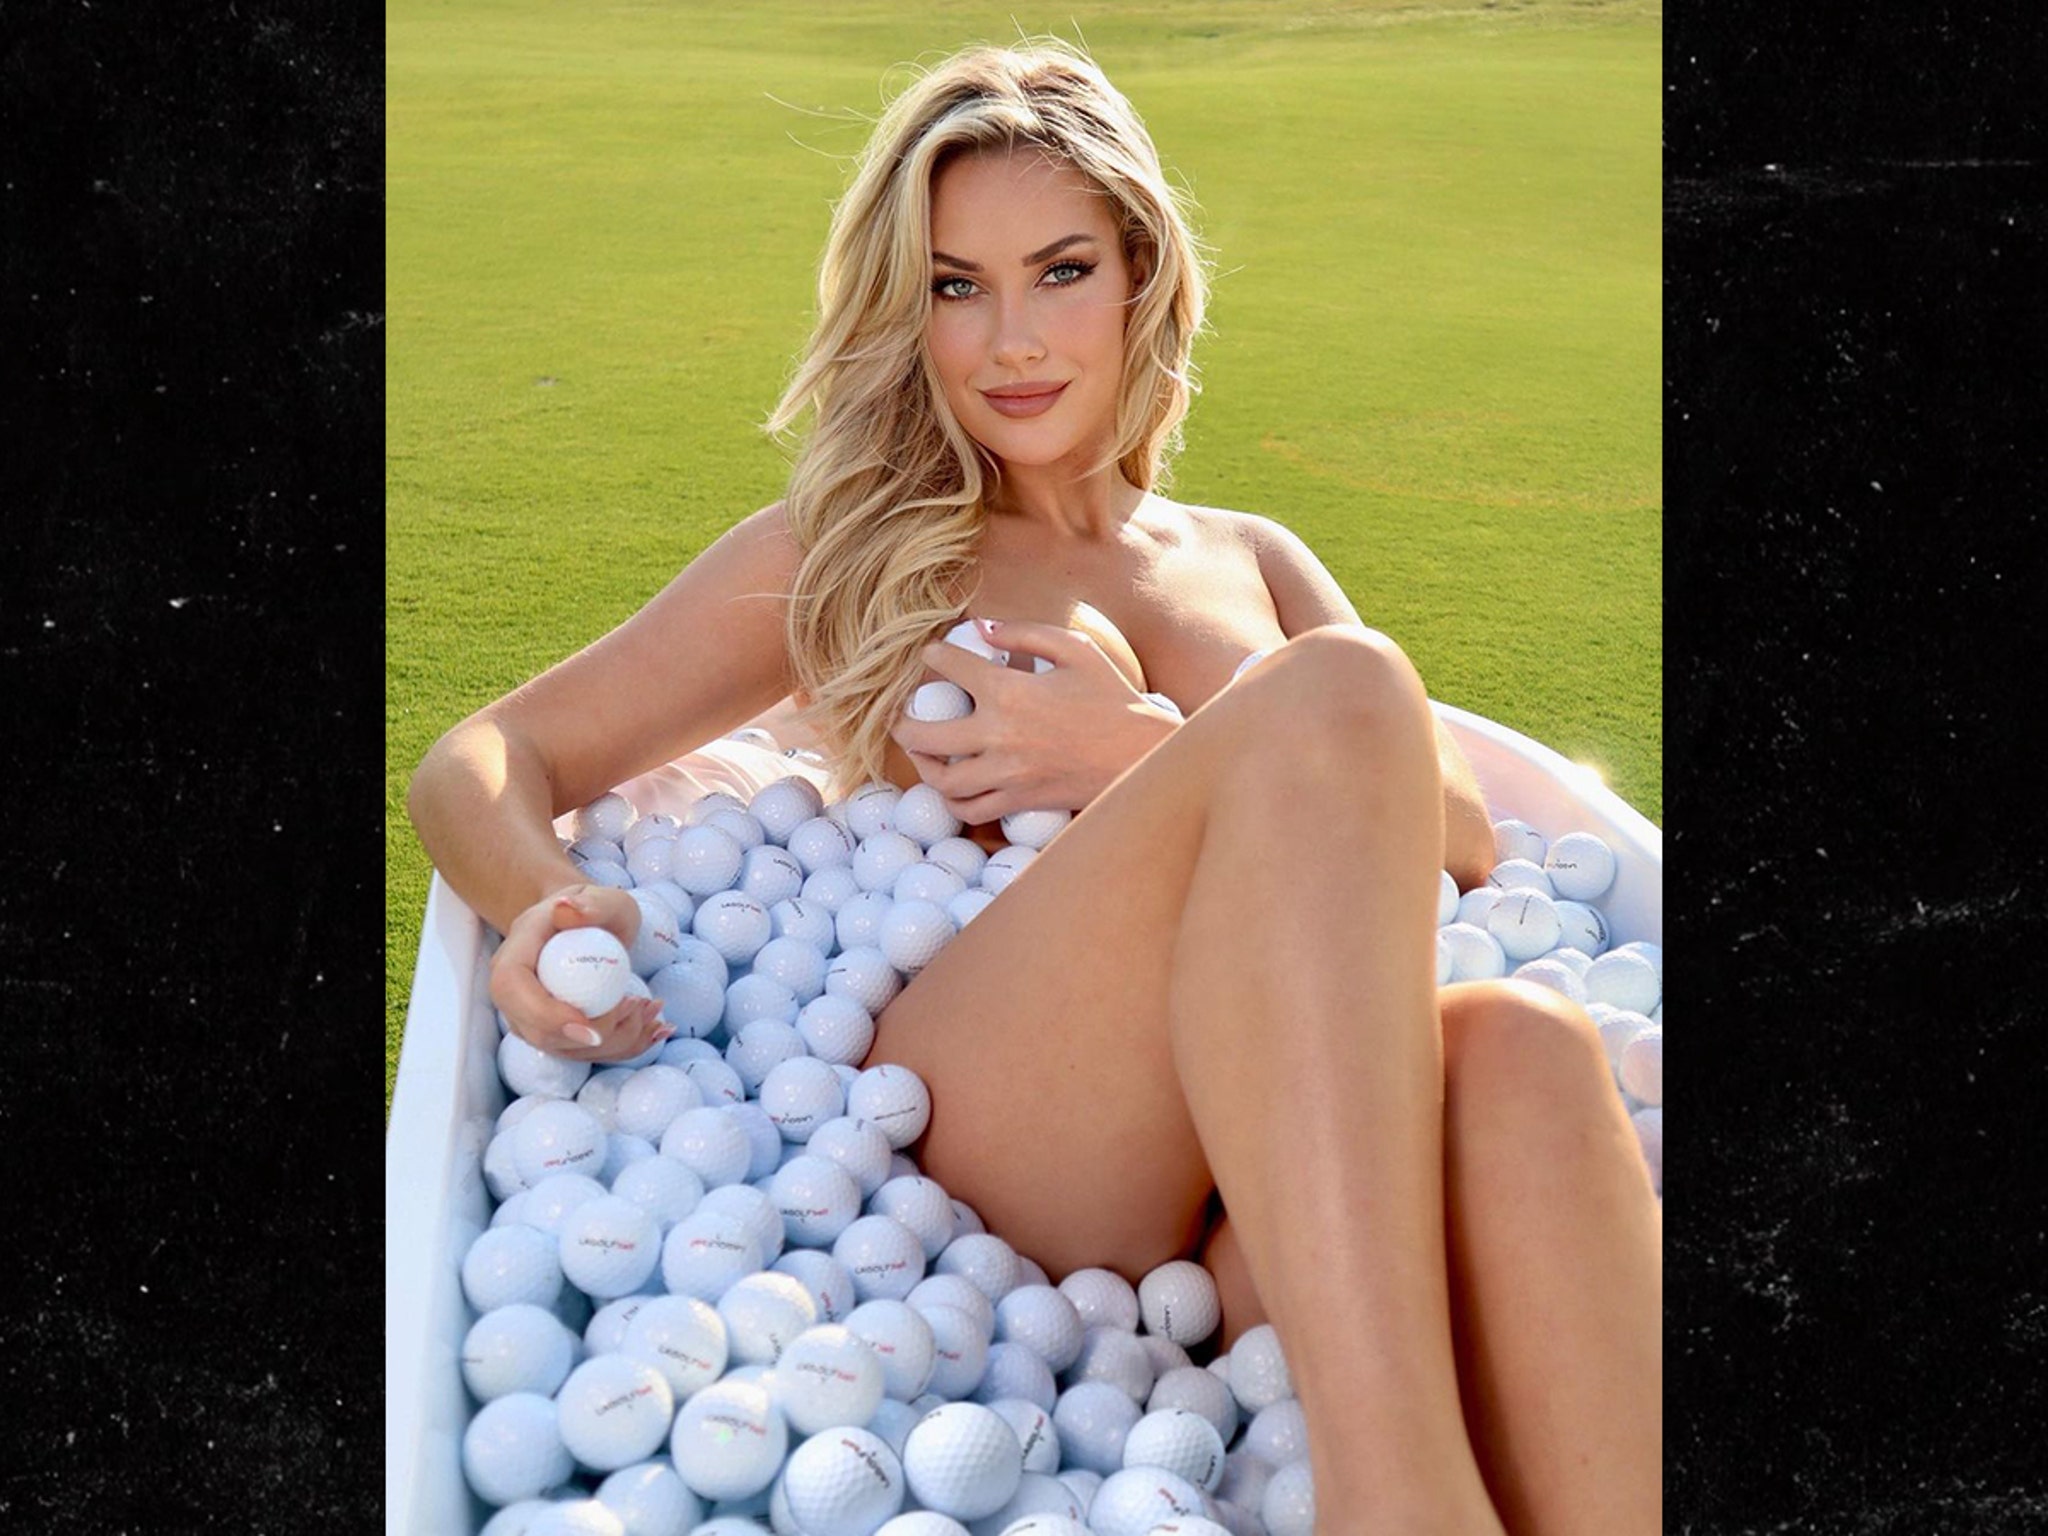 Golf Star Paige Spiranac Poses Naked In Tub Full Of Balls, Jan Stephenson Style! picture